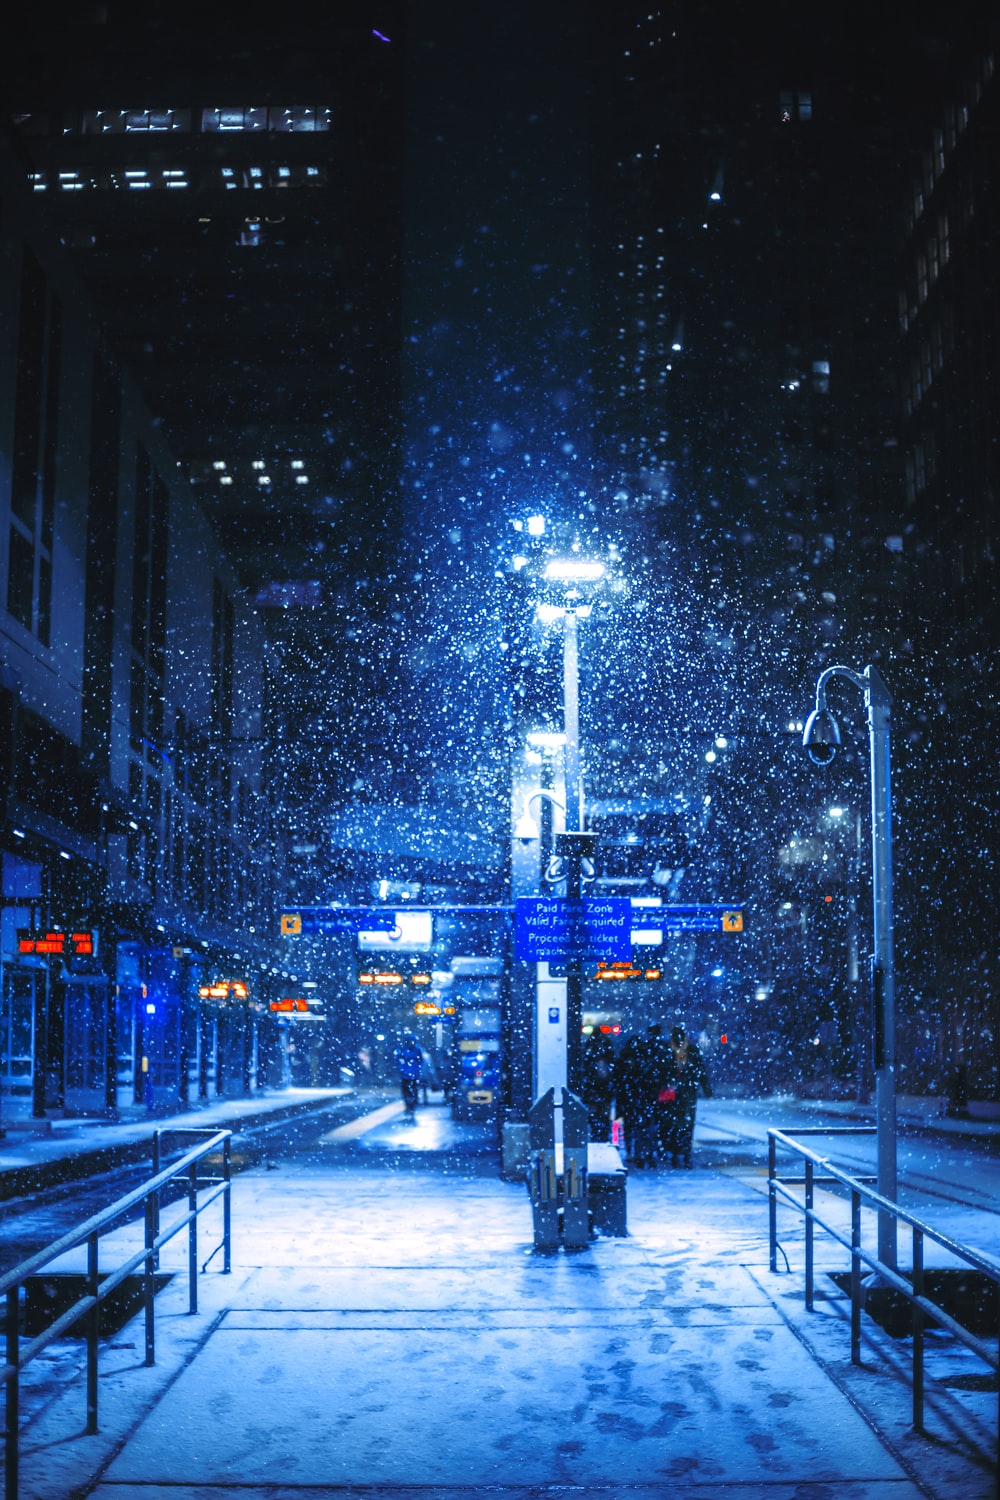 Snow City Picture. Download Free Image